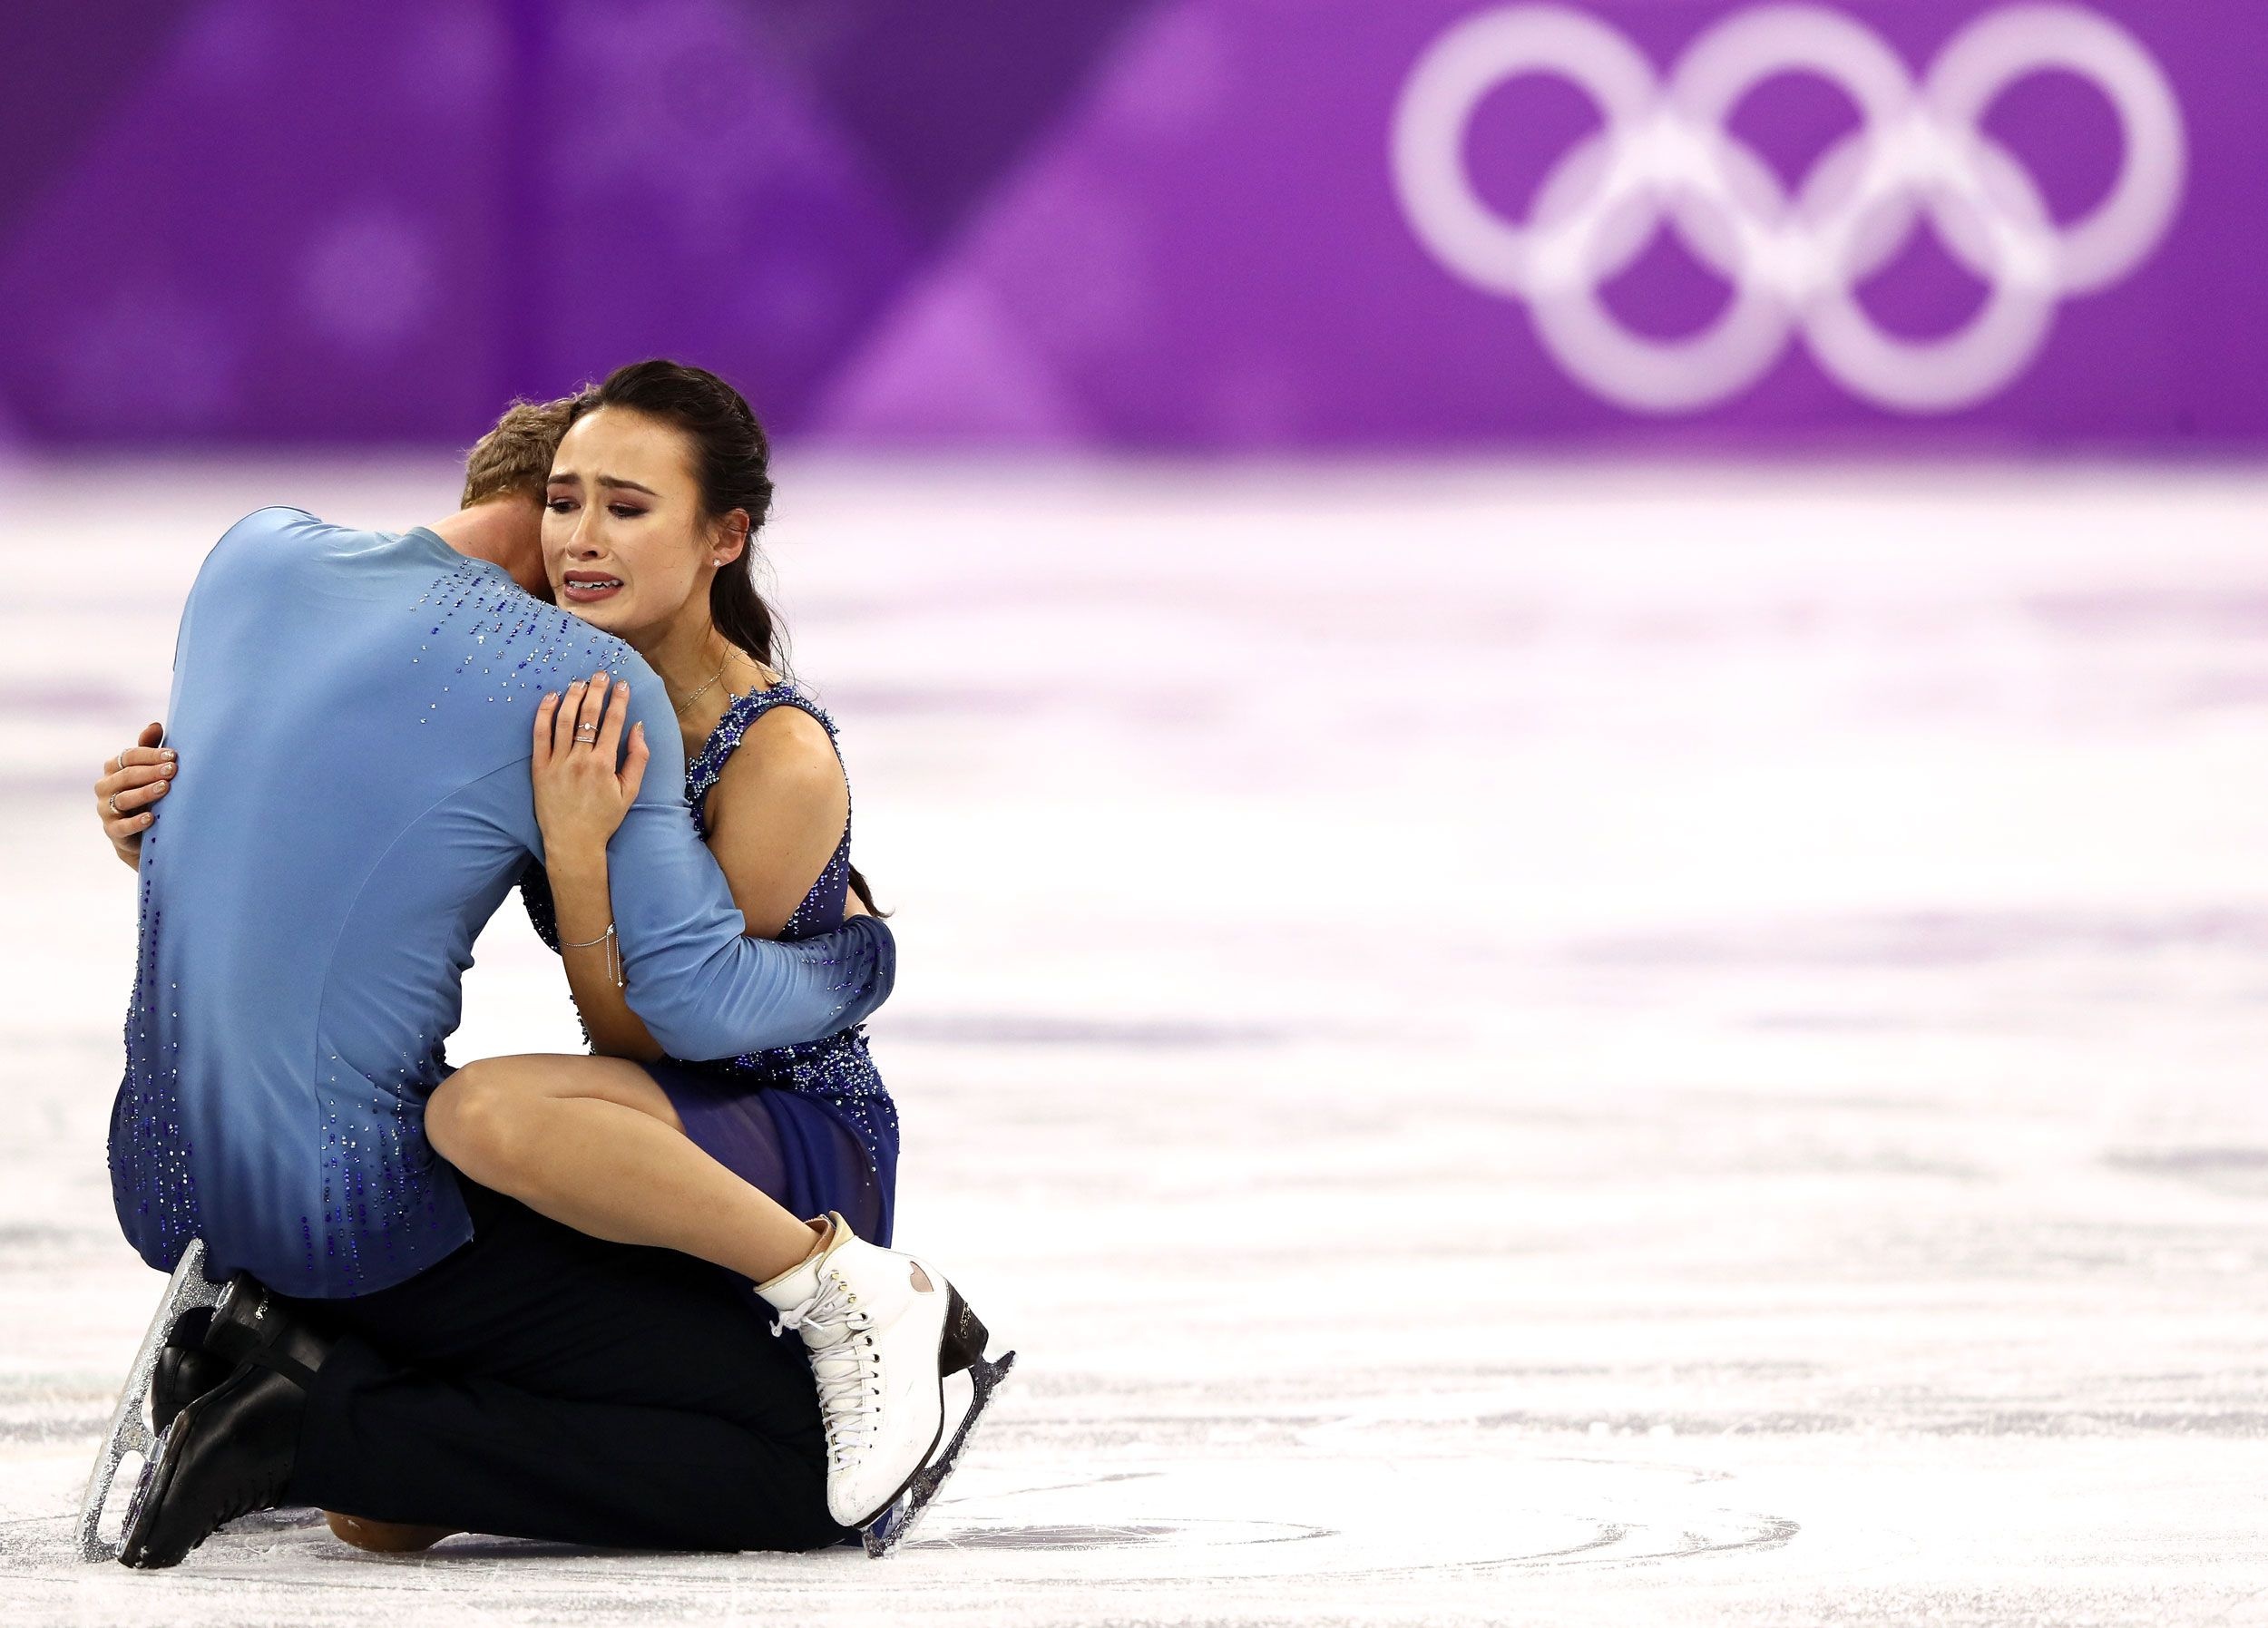 Ice Dancing: Madison Chock and Evan Bates, Three-time World medalists, Crash during Ice Dancing Finals, After a fall on ice. 2500x1800 HD Background.